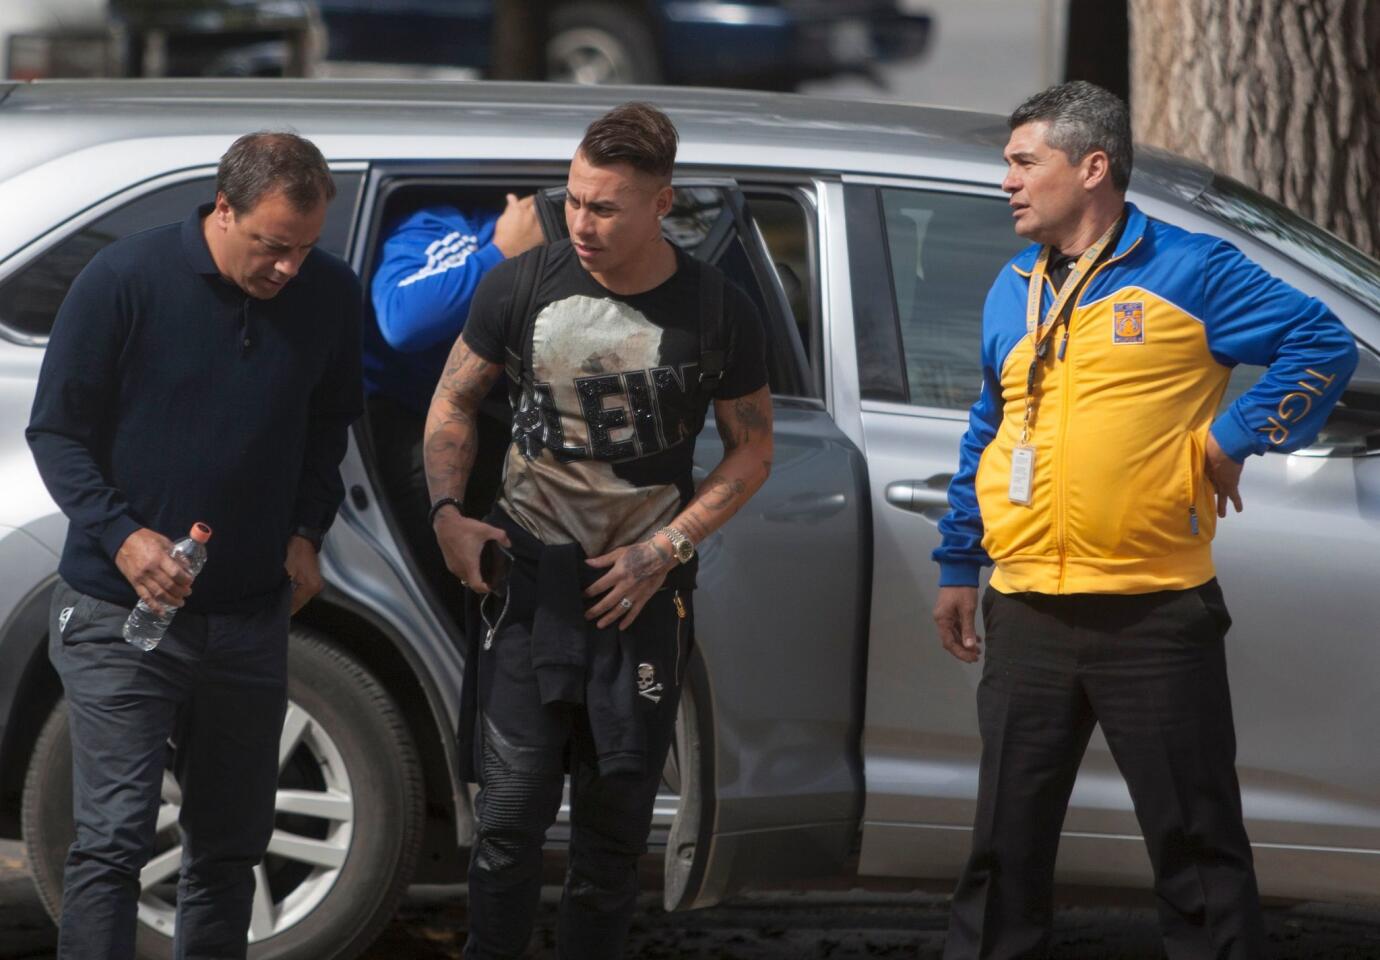 Chilean striker Eduardo Vargas (C) arrives for medical tests to play with his new team Mexican Tigres at the University Hospital of the city of Monterrey in Nuevo Leon, Mexico, on January 29, 2017. / AFP PHOTO / JULIO AGUILARJULIO AGUILAR/AFP/Getty Images ** OUTS - ELSENT, FPG, CM - OUTS * NM, PH, VA if sourced by CT, LA or MoD **